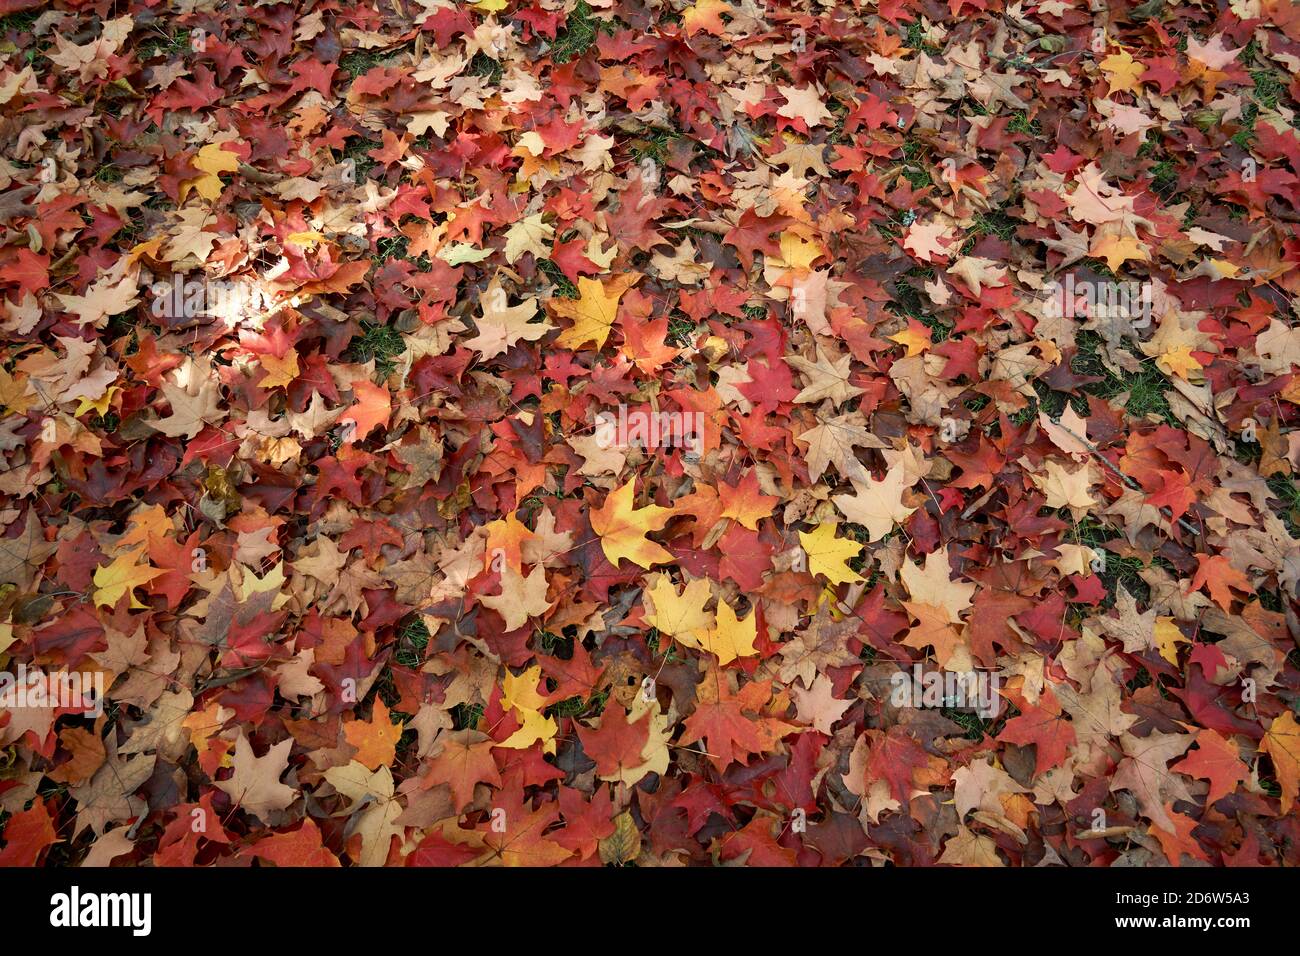 Background of red, yellow, and orange maple leaves scattered on the ground in the fall, Vancouver, British Columbia, Canada Stock Photo